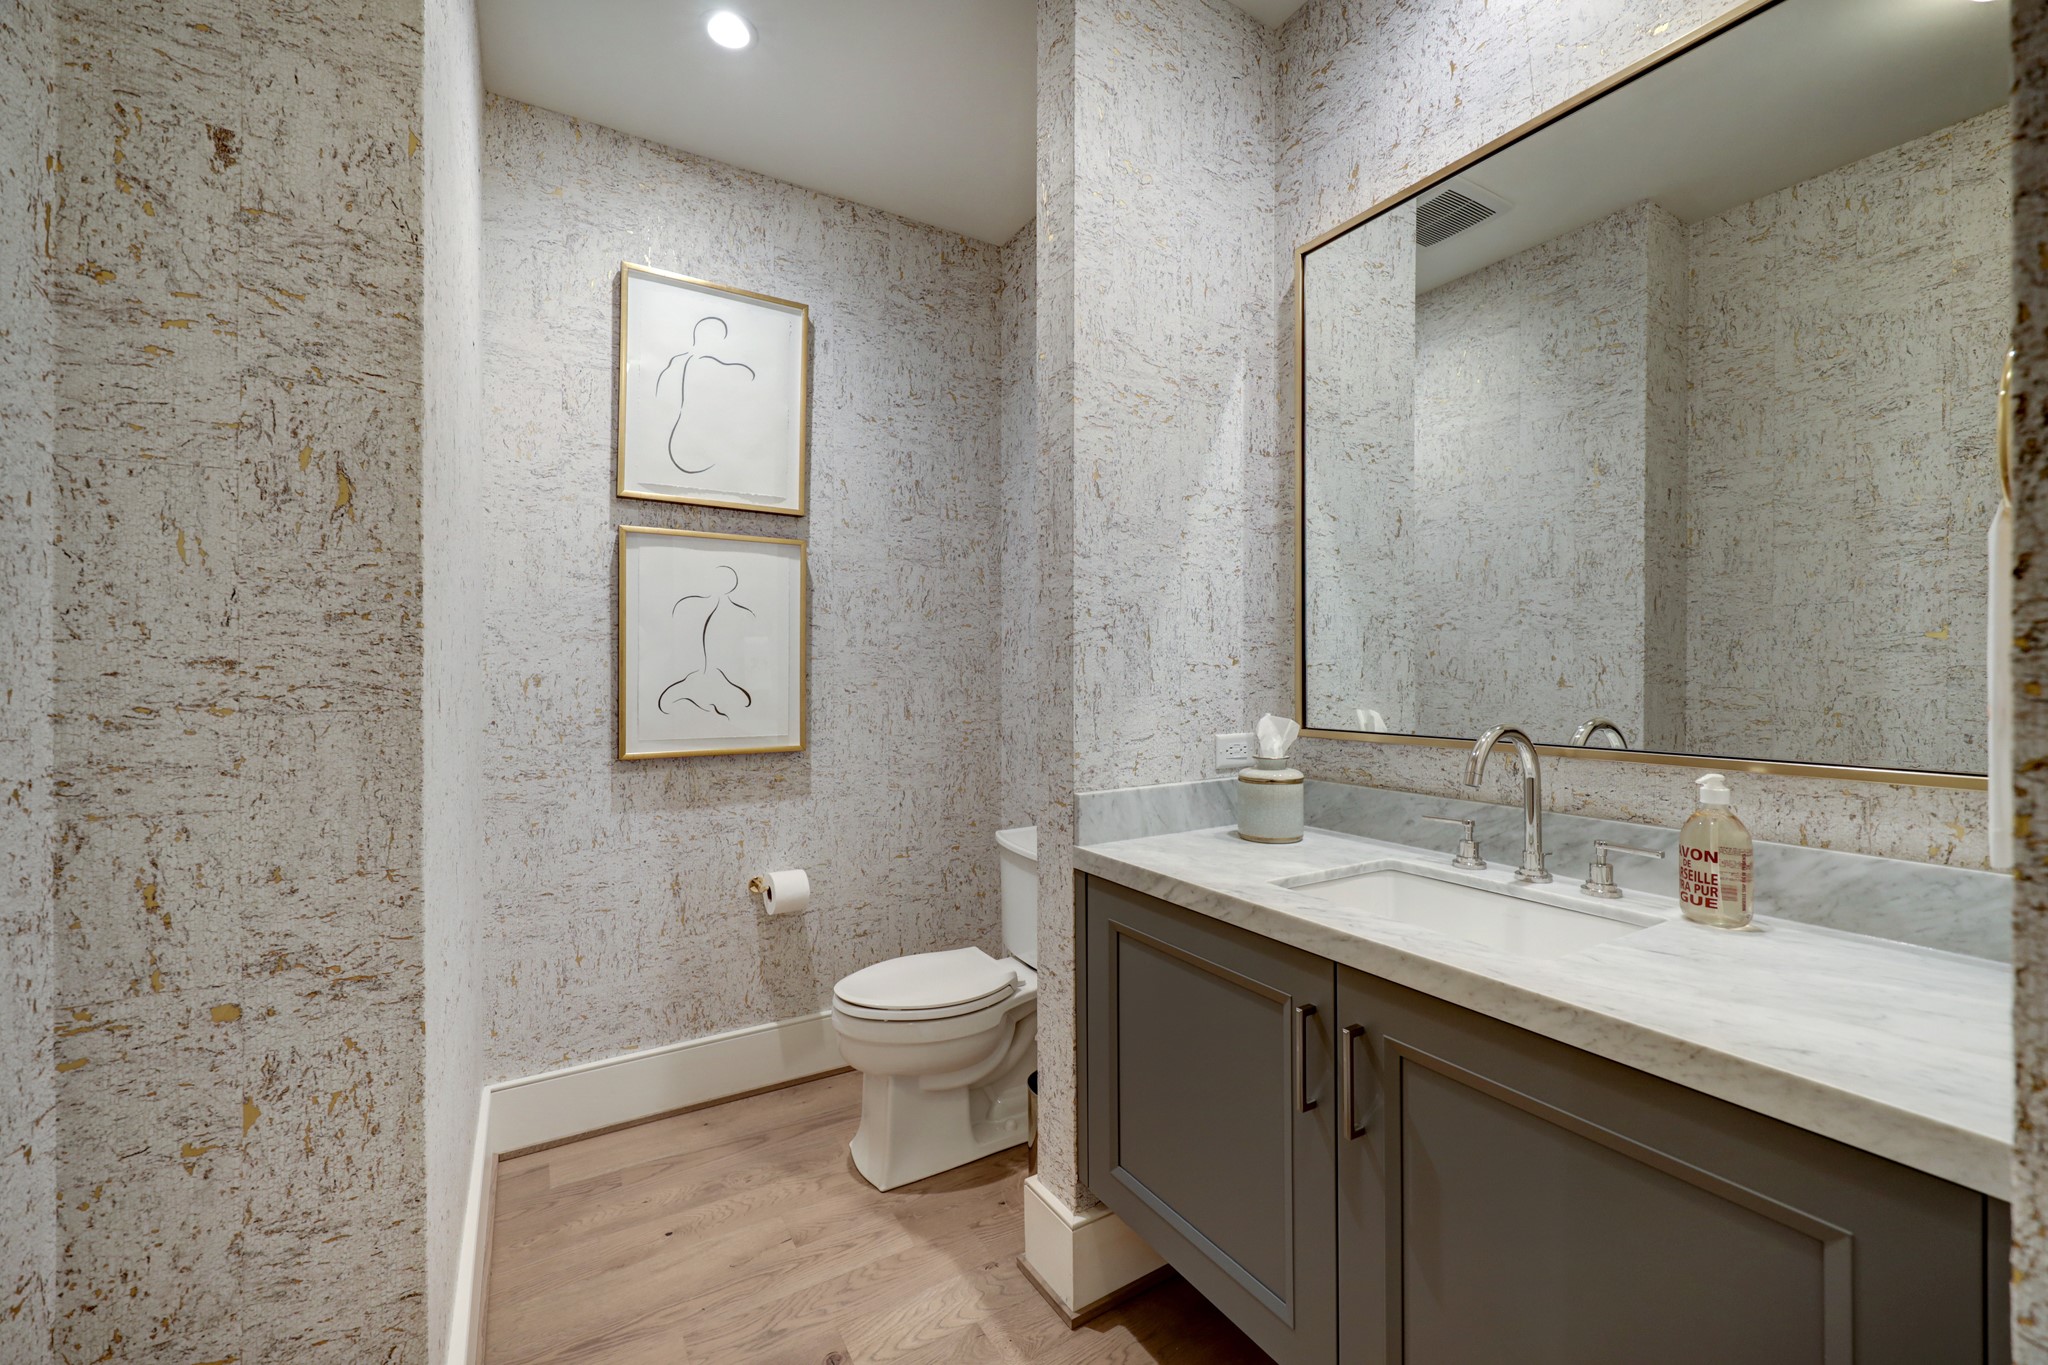 The over-sized formal POWDER ROOM features stone counter/backsplash with Kohler sink/cabinets below, elegant papered walls, hardwood flooring, base molding, decorative framed mirror/ Rohl fixtures and recessed lighting.